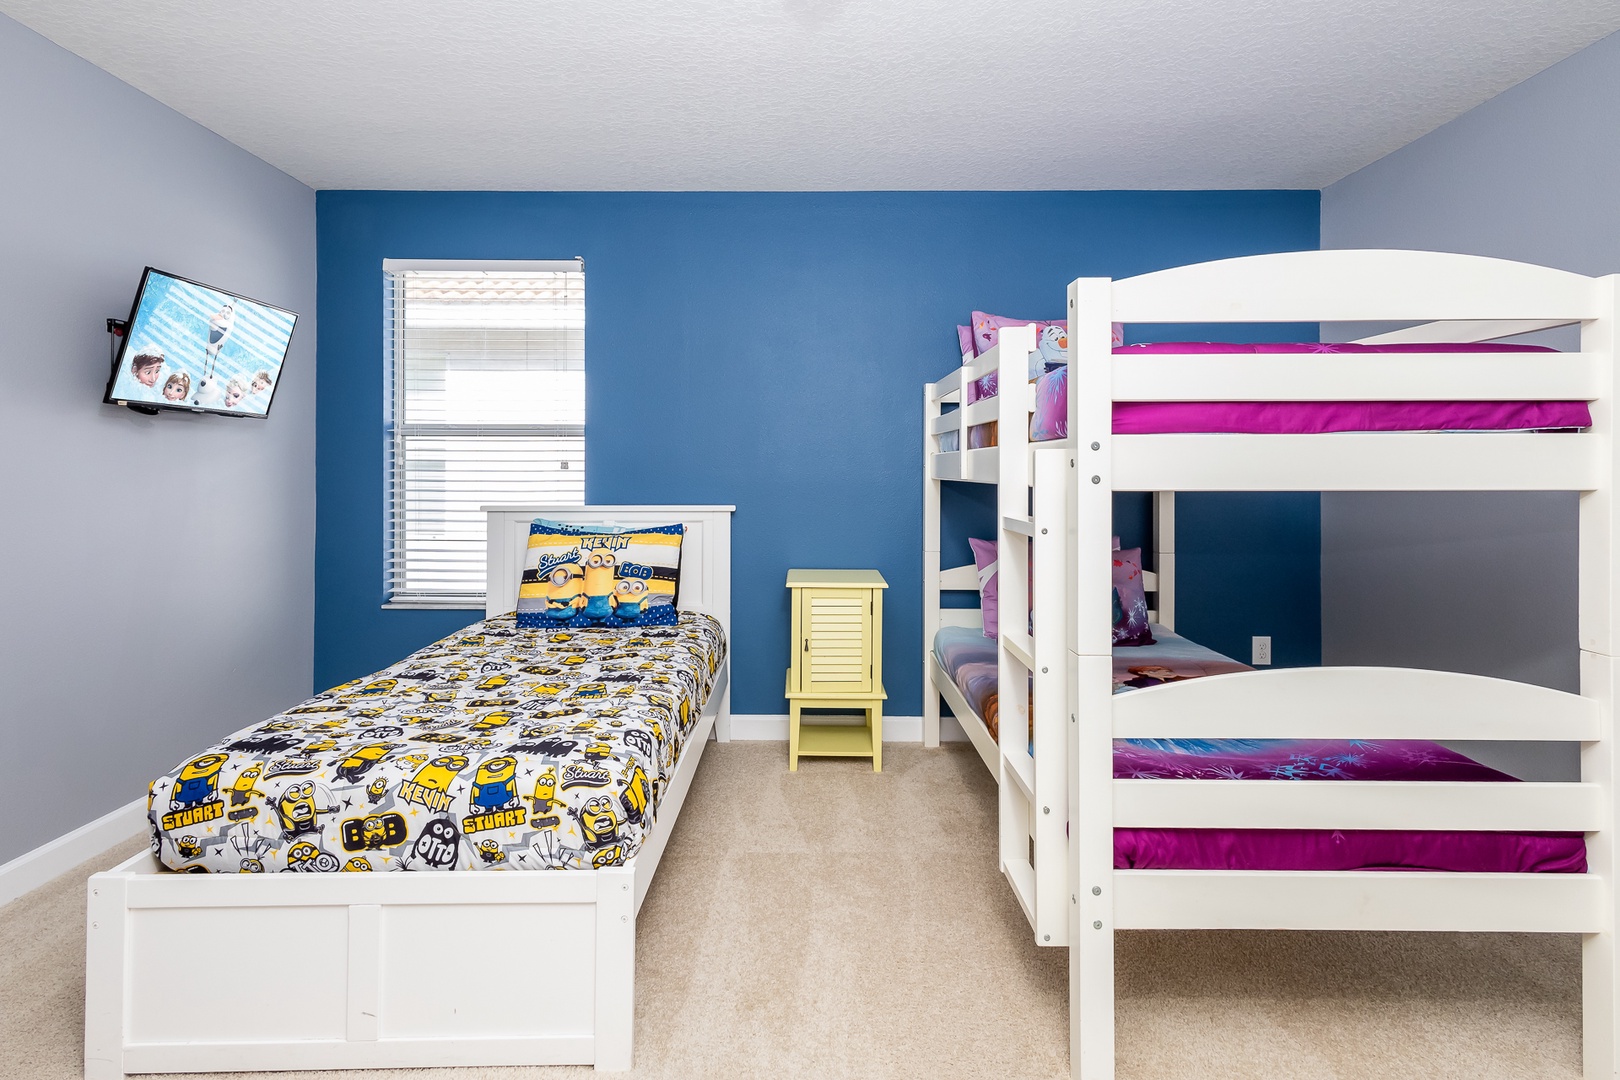 The kids will be saying, “Boo-yah!” while relaxing in this comfortable double Twin bed and bunk bed with its own Smart TV